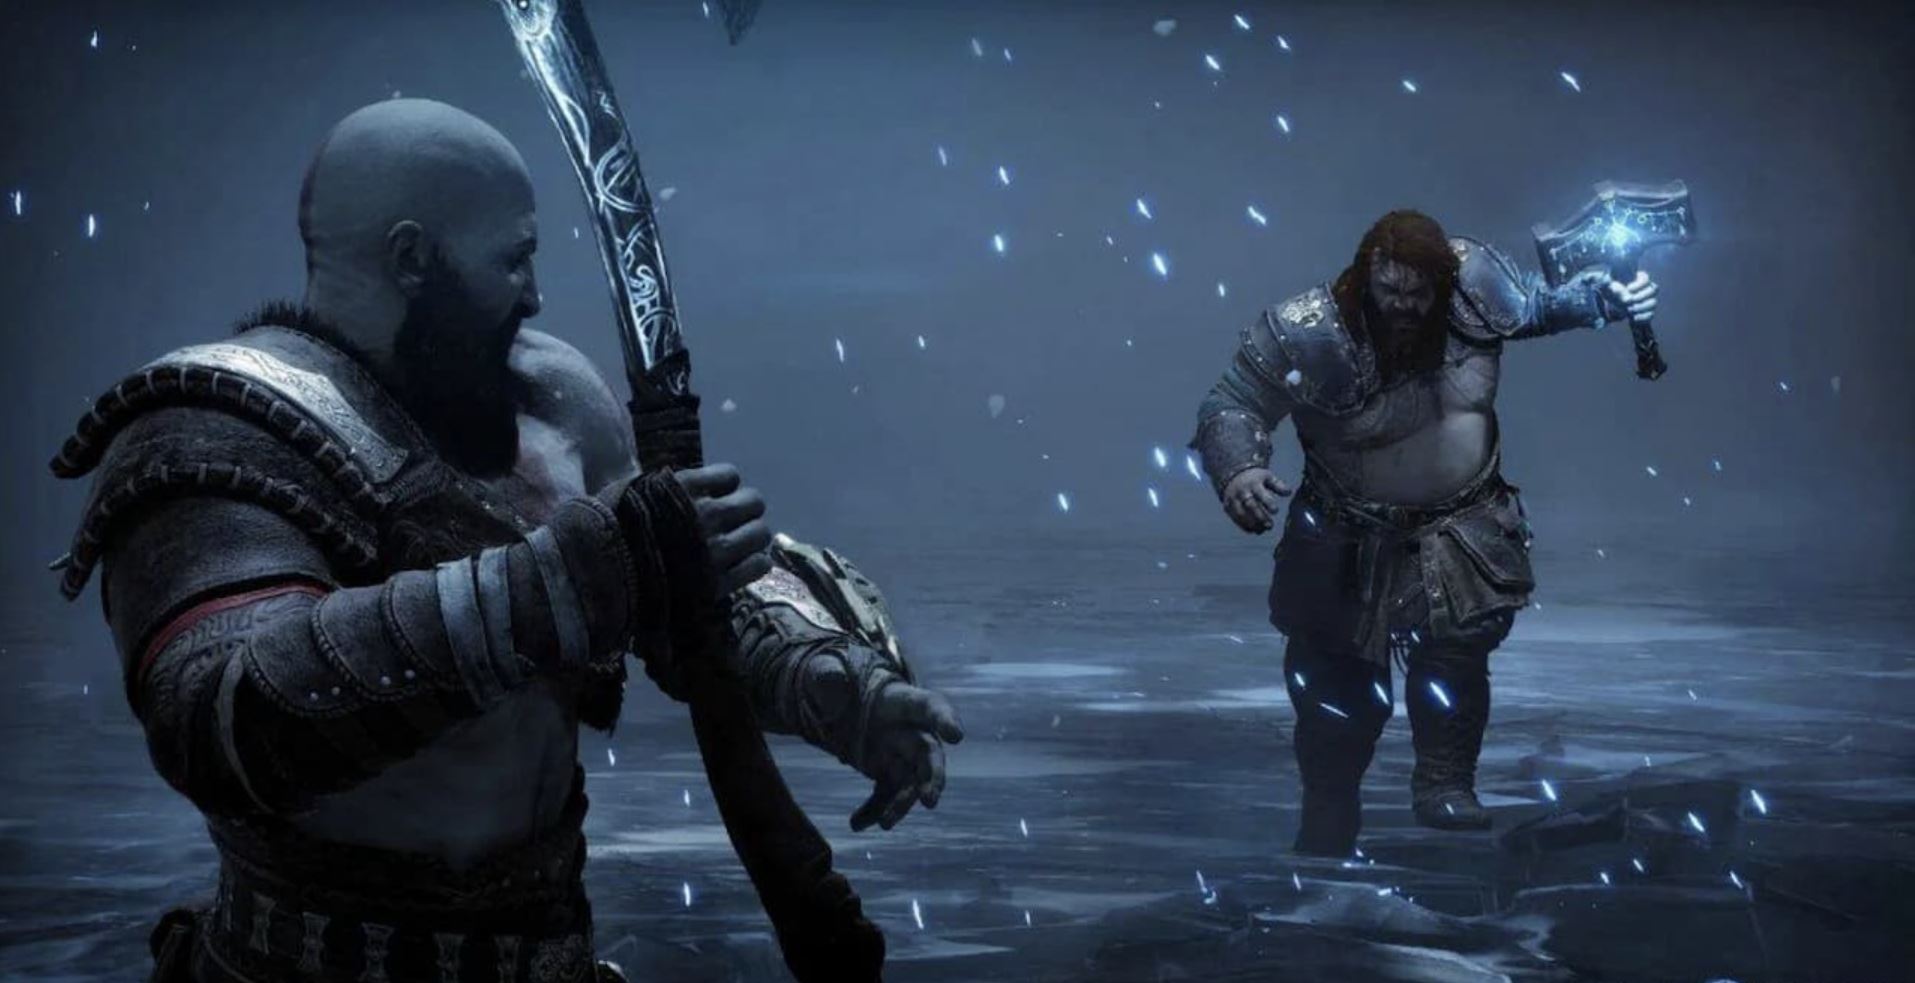 Thor Solos Bosses in God of War: Ragnarok, Proving He's the Most